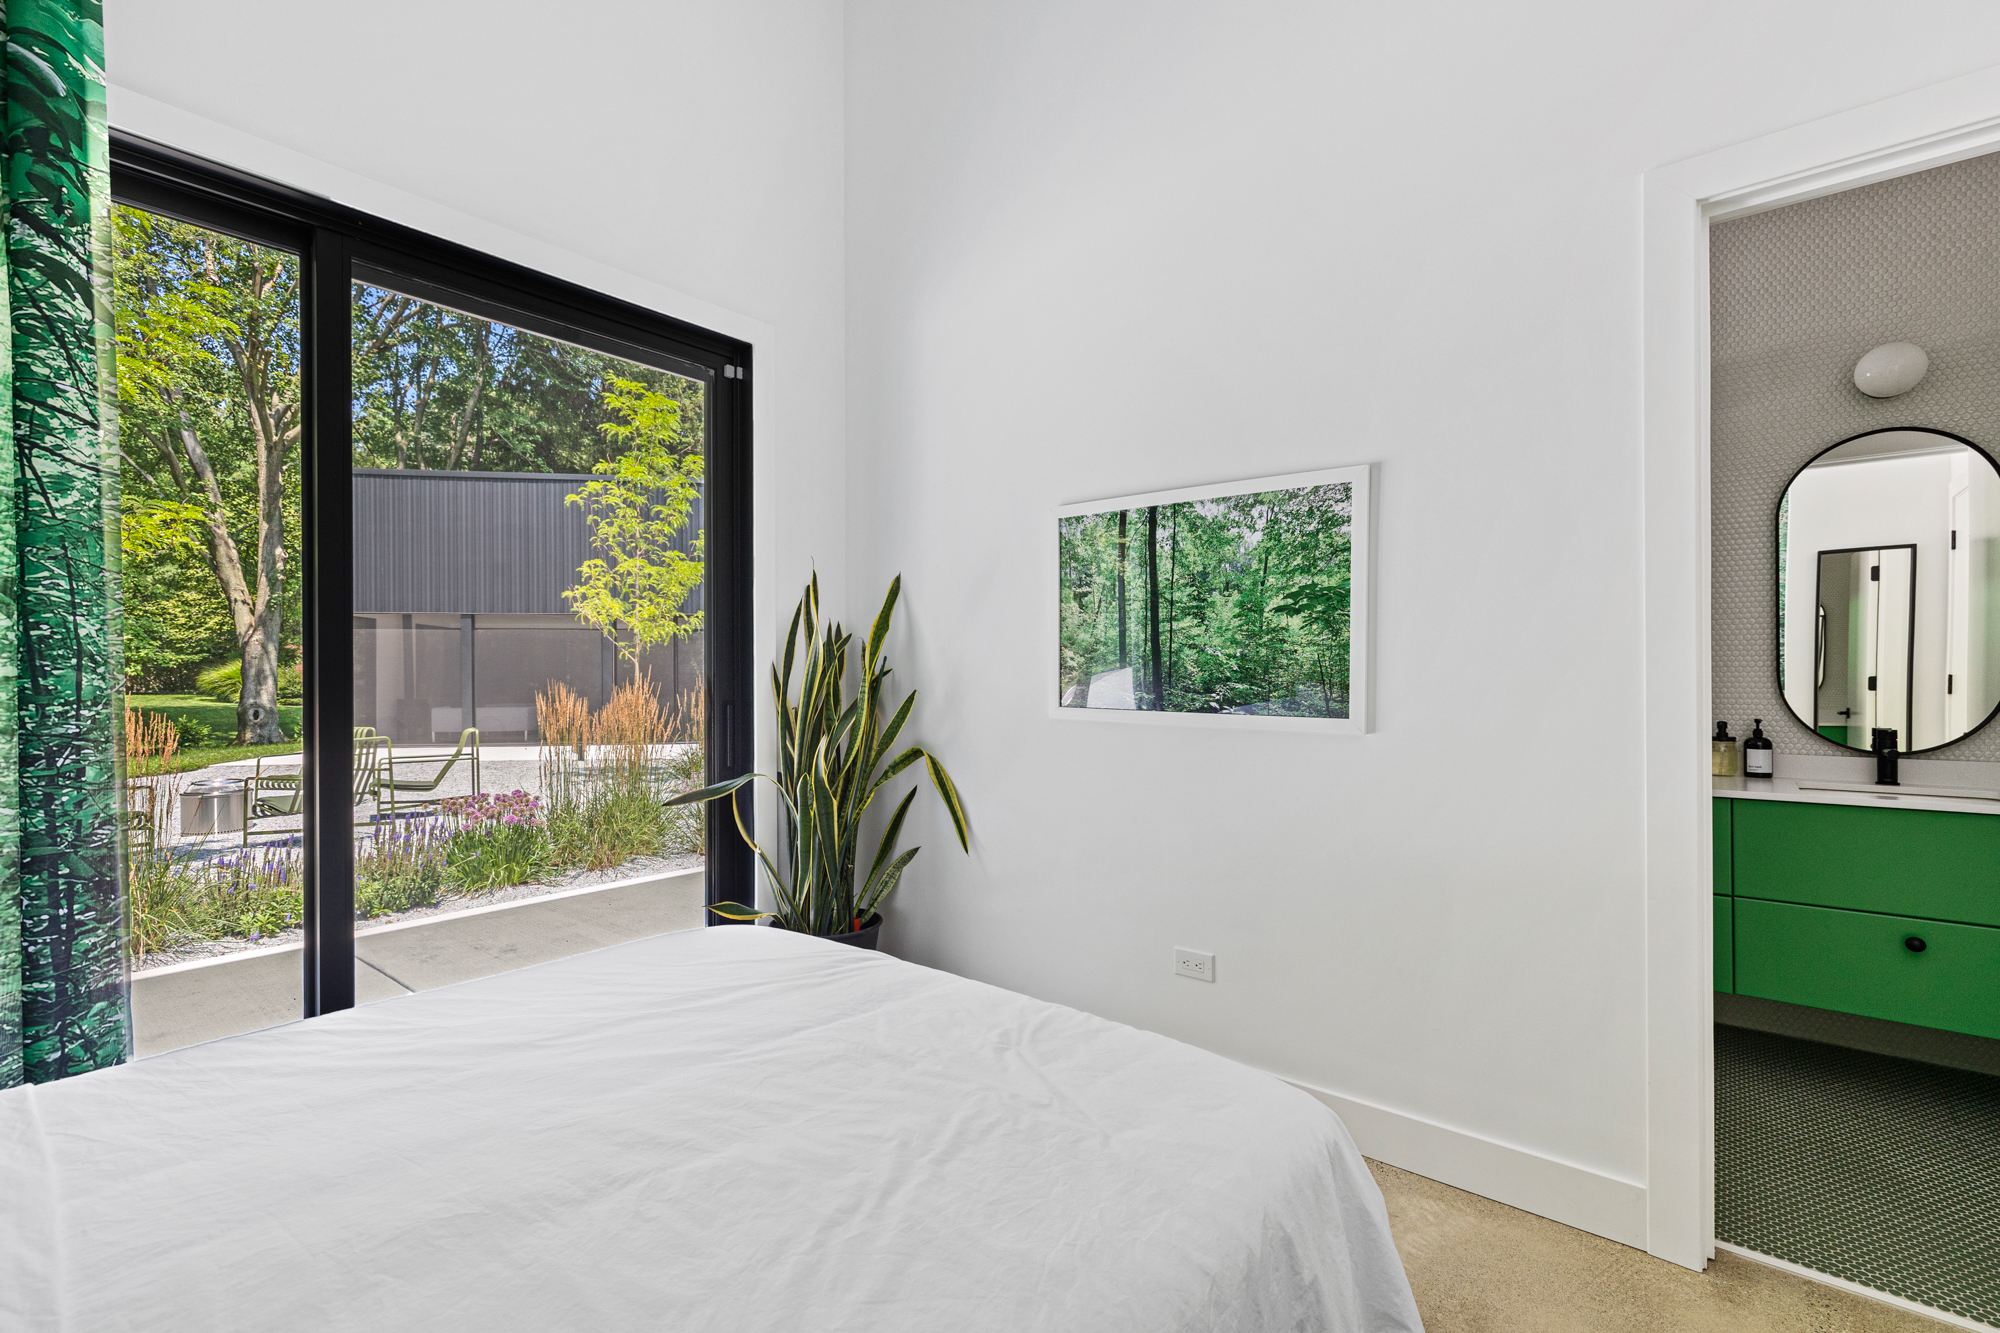 Each tranquil bedroom has private access to the courtyard.